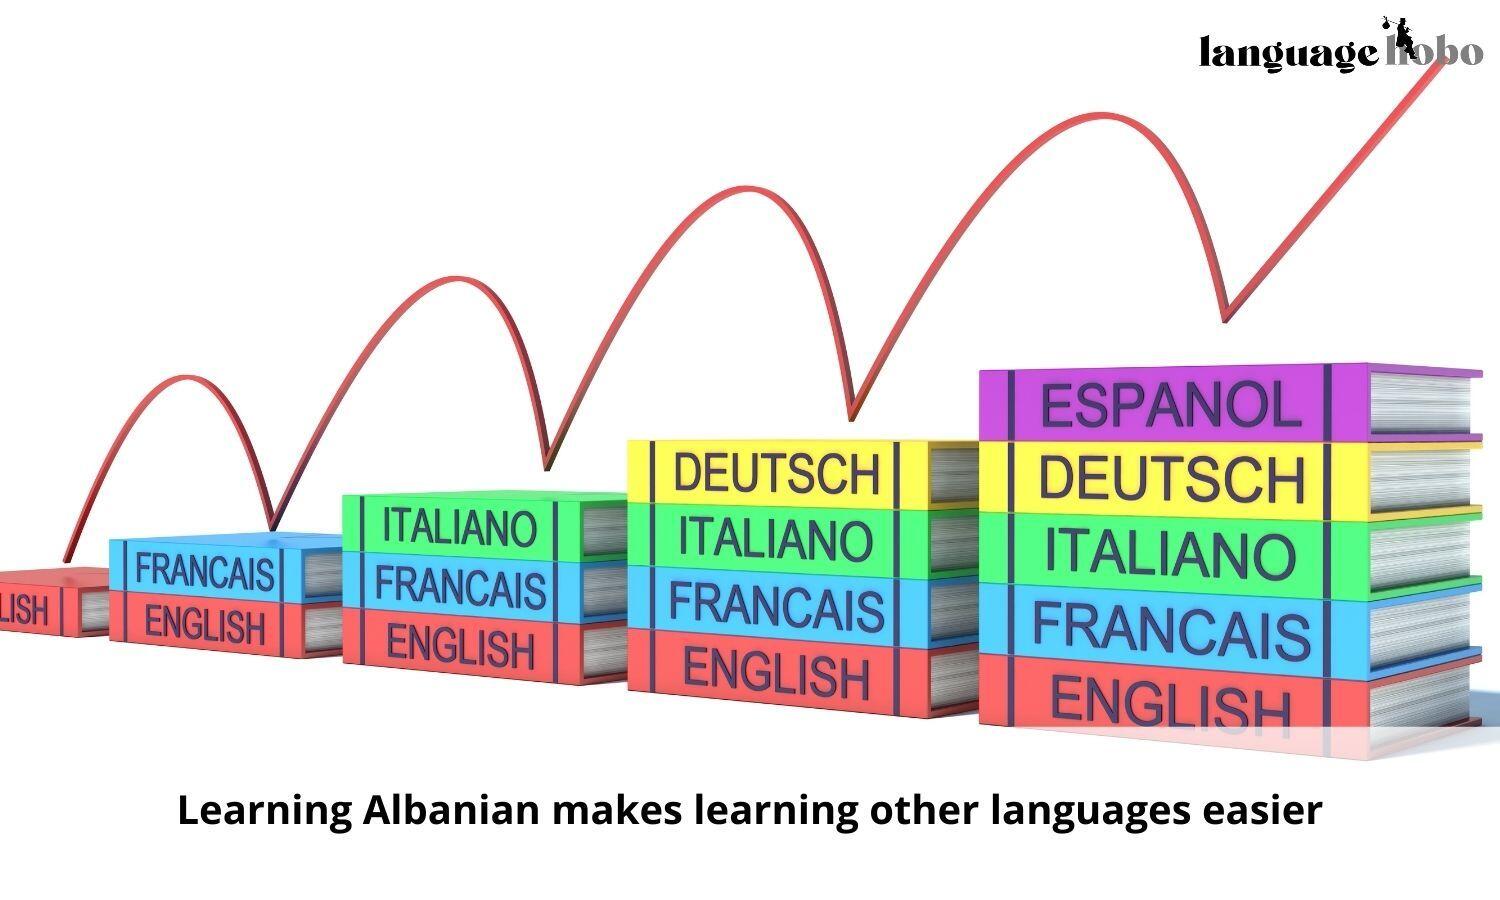 Learning albanian makes other languages easier